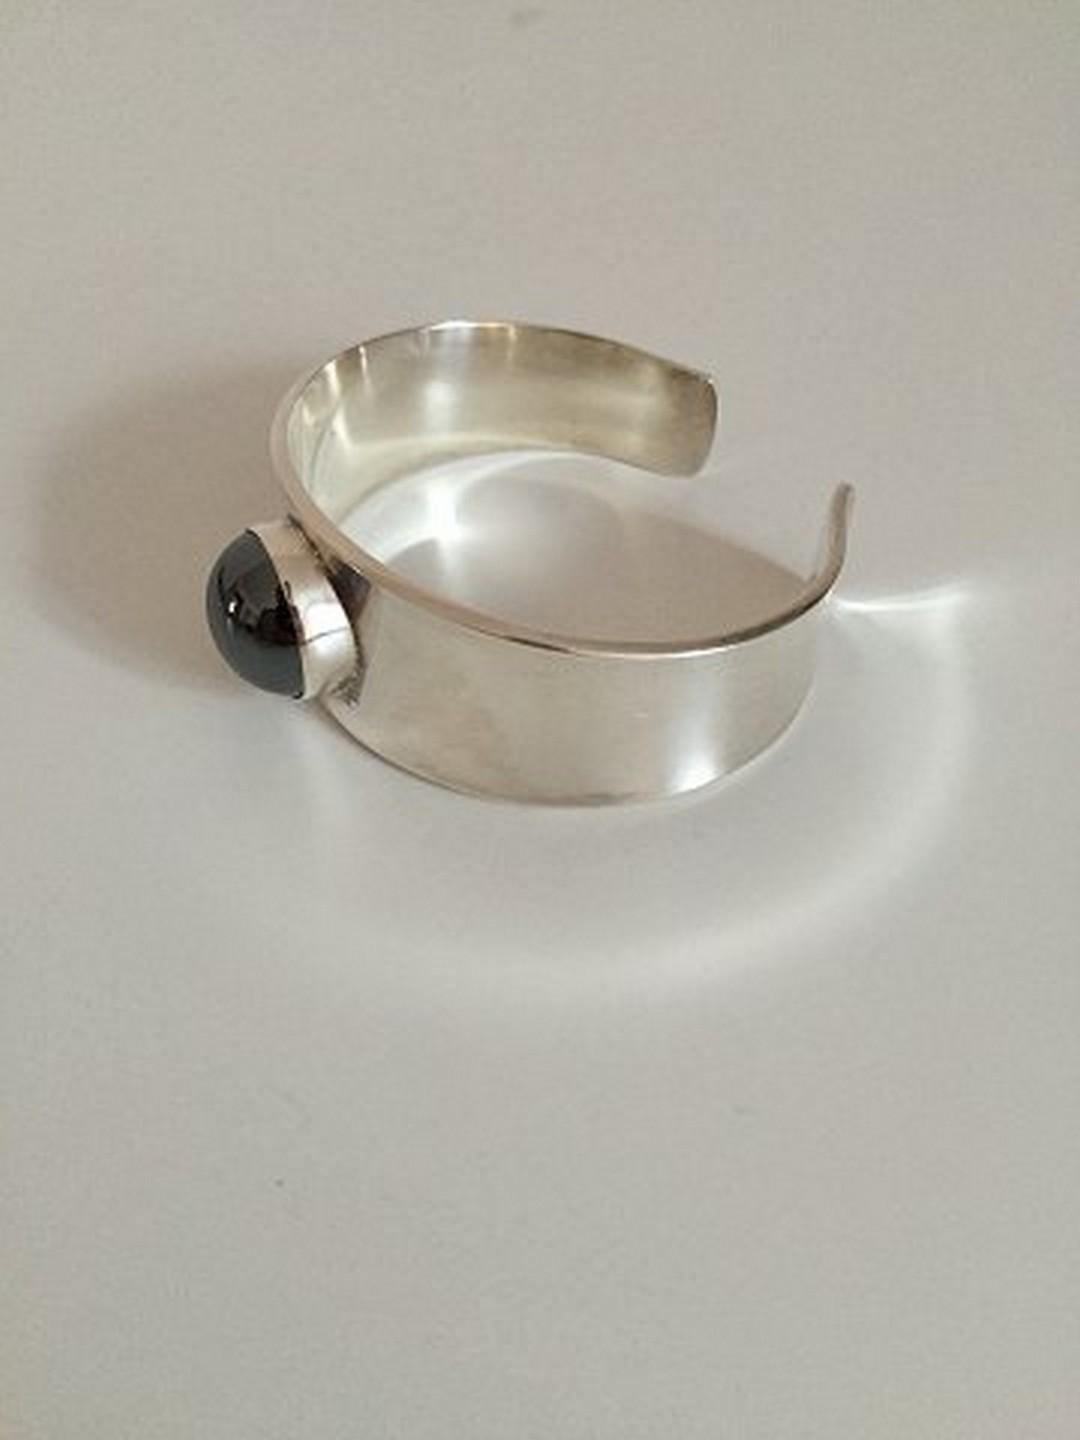 Georg Jensen Sterling Silver Cuff Bracelet #188 designed by Paul Hansen. Ornamented with hematite. From after 1945.